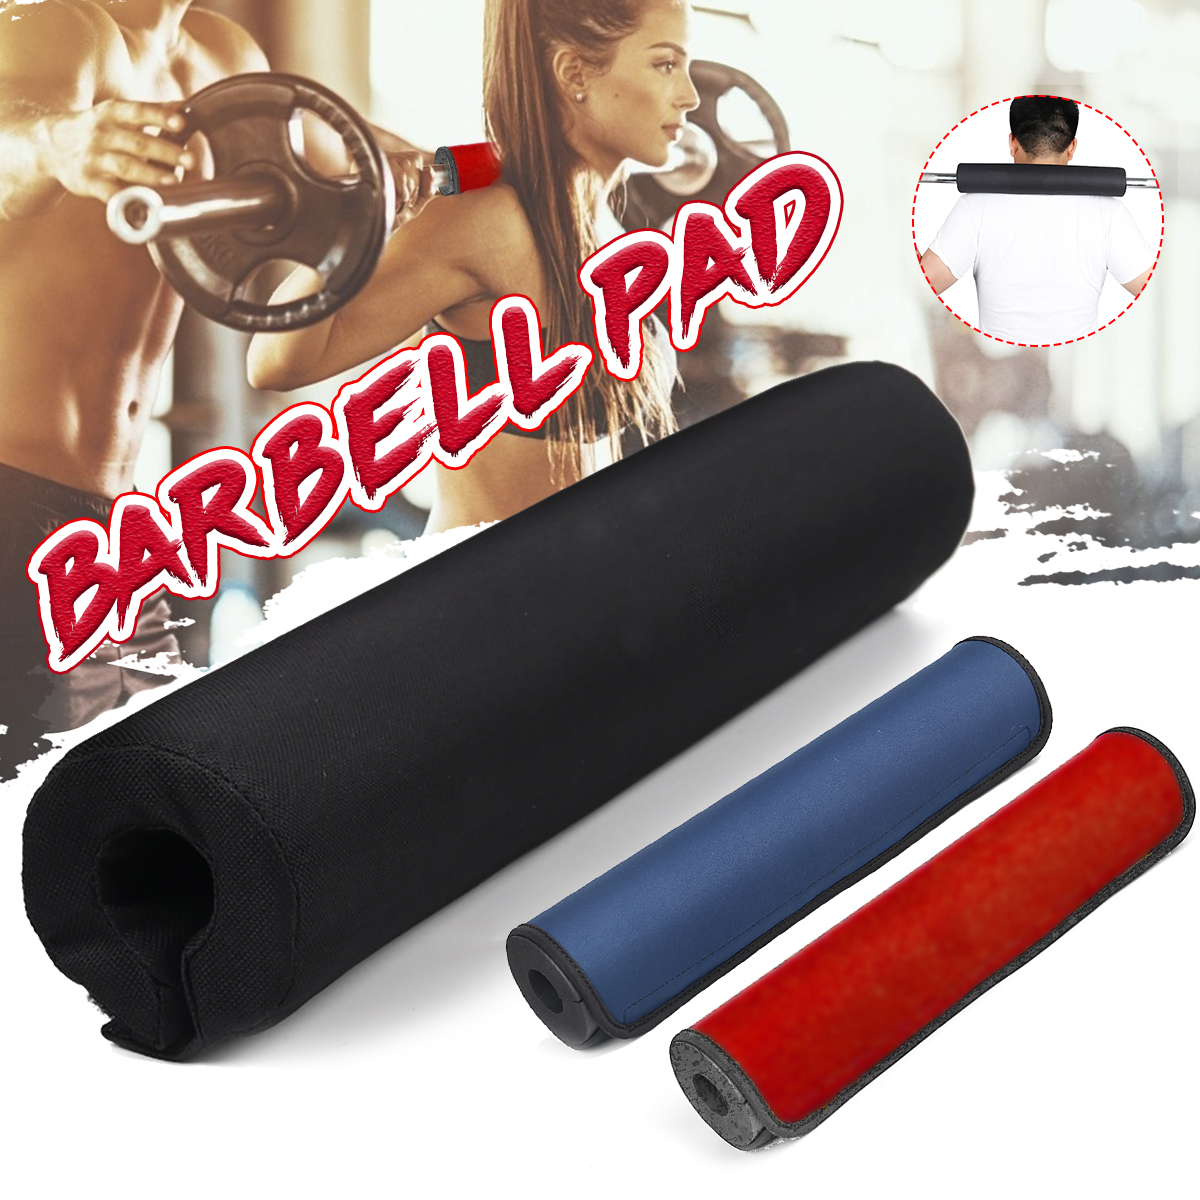 Protective-Shoulder-Pads-Support-Gym-Weightlifting-Squat-Fitness-Bar-Barbell-Pad-1689343-1